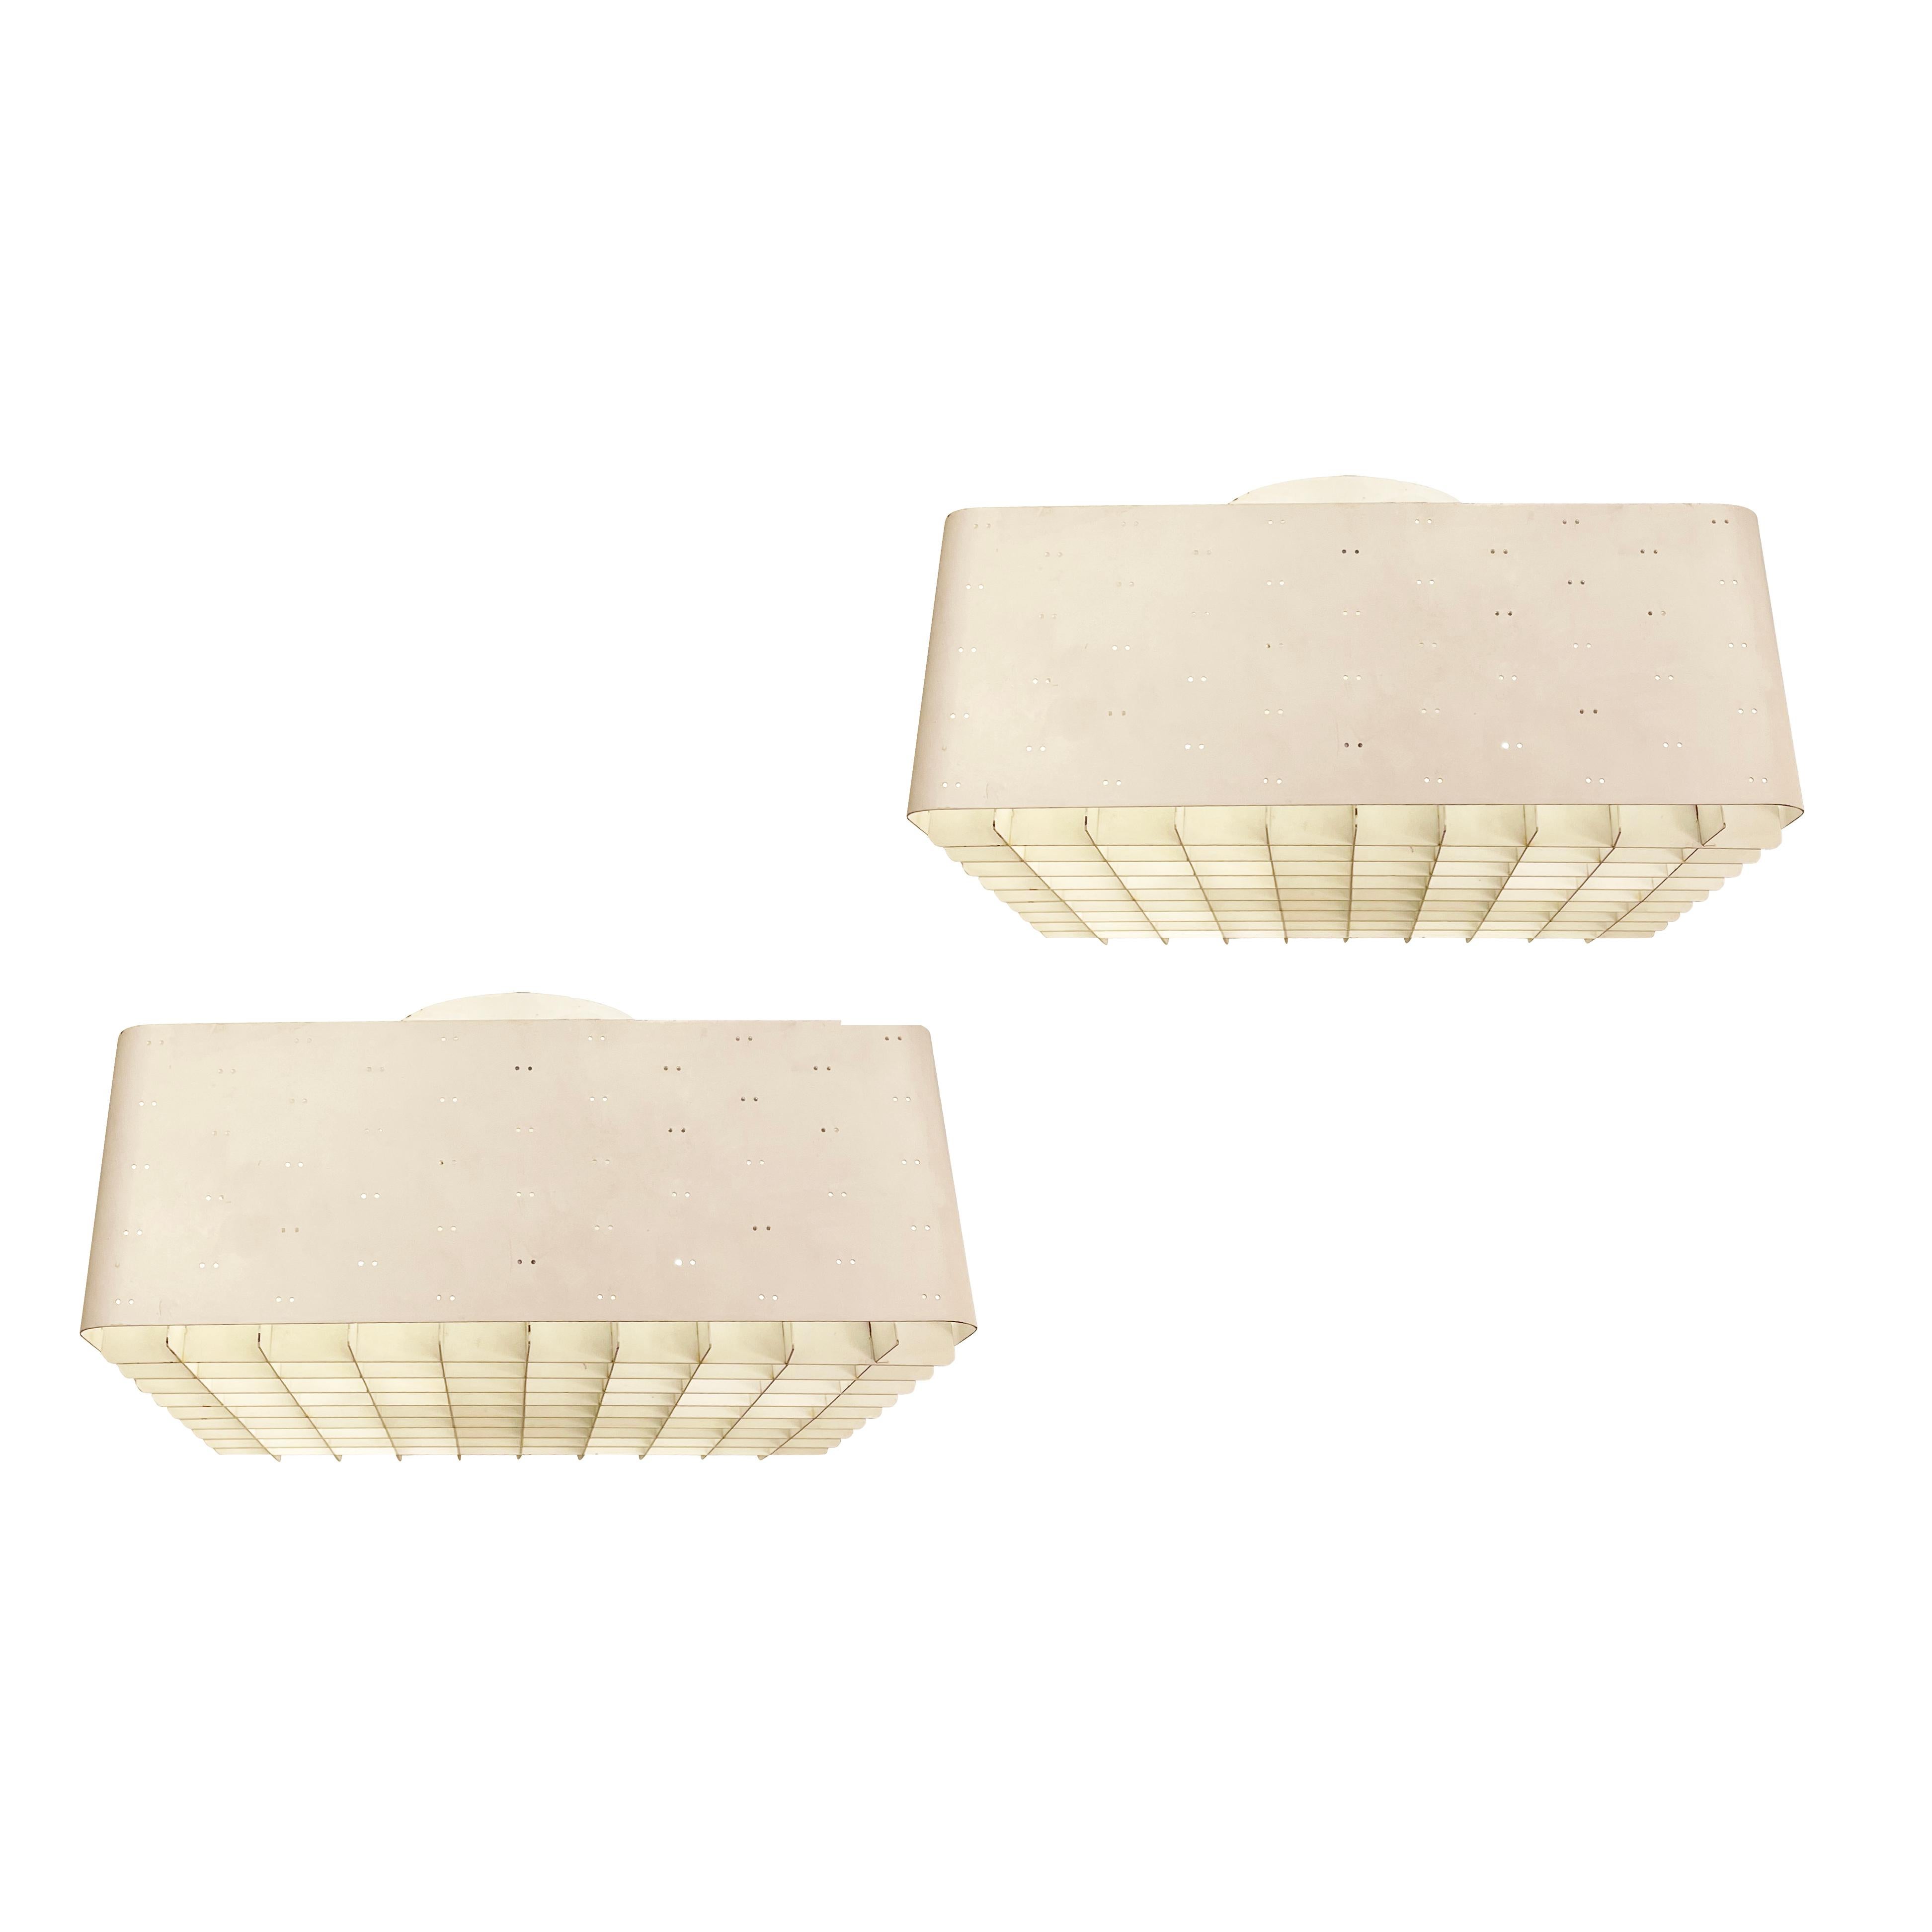 “Starry Sky” ceiling lights, Model 9068, designed by Paavo Tynell for Idman Oy. Finland 1960s. Each features a white perforated square shade with a frosted glass diffuser and grid. Each holds 4 E26 sockets. Two available- Price per